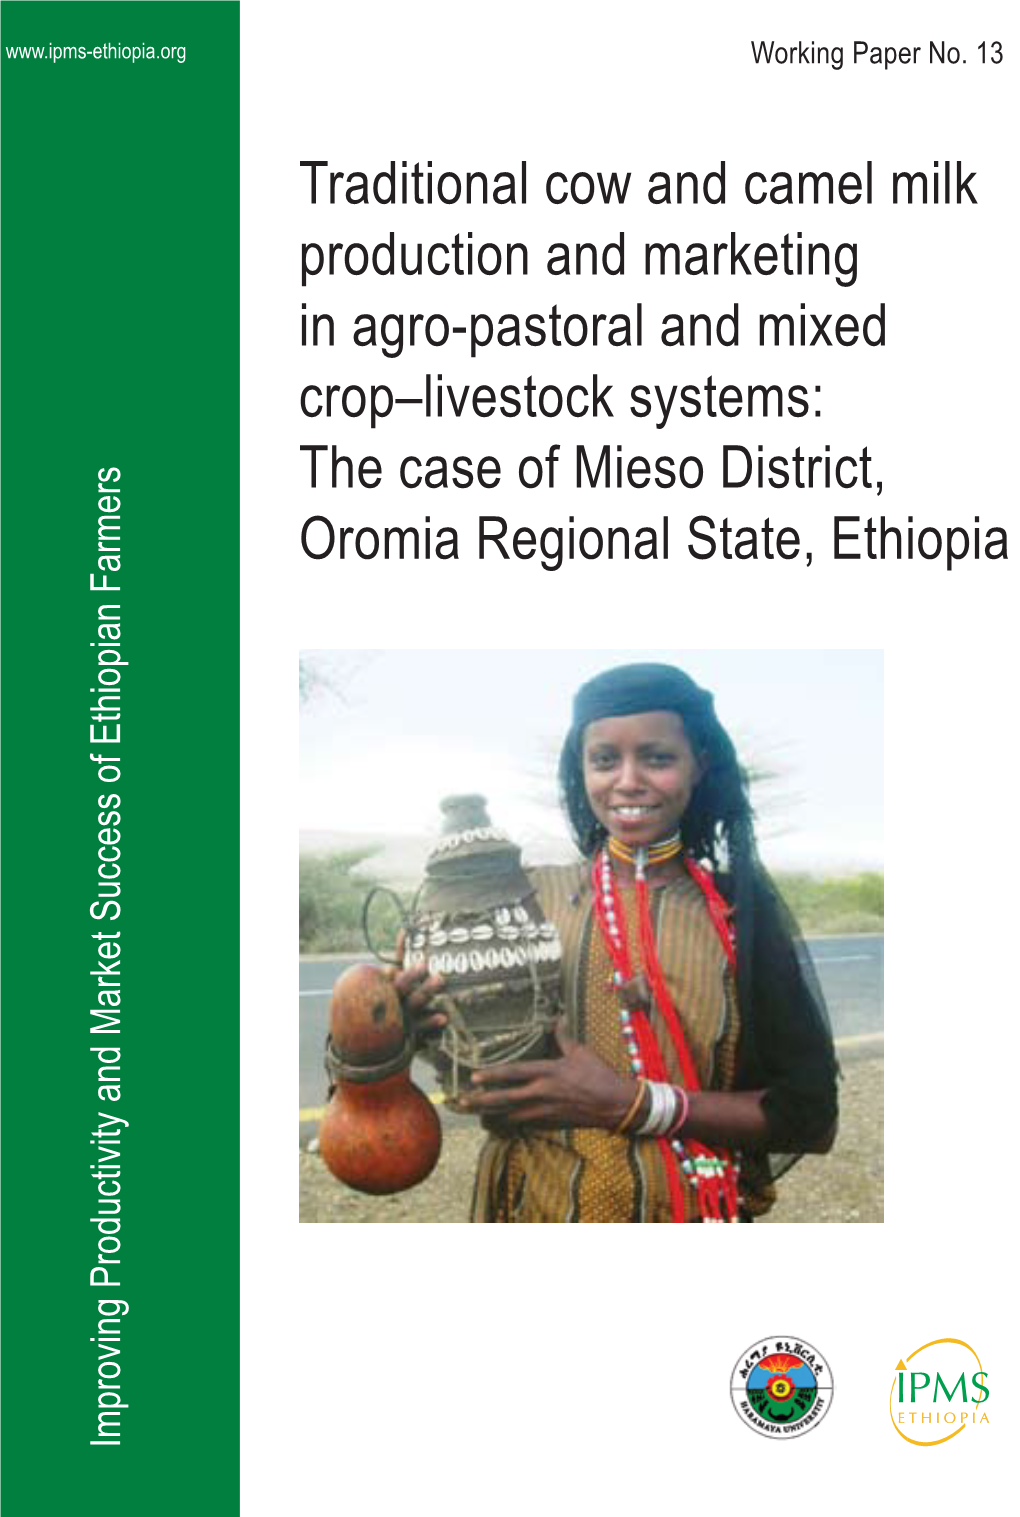 Traditional Cow and Camel Milk Production and Marketing in Agro-Pastoral and Mixed Crop–Livestock Systems: the Case of Mieso District, Oromia Regional State, Ethiopia